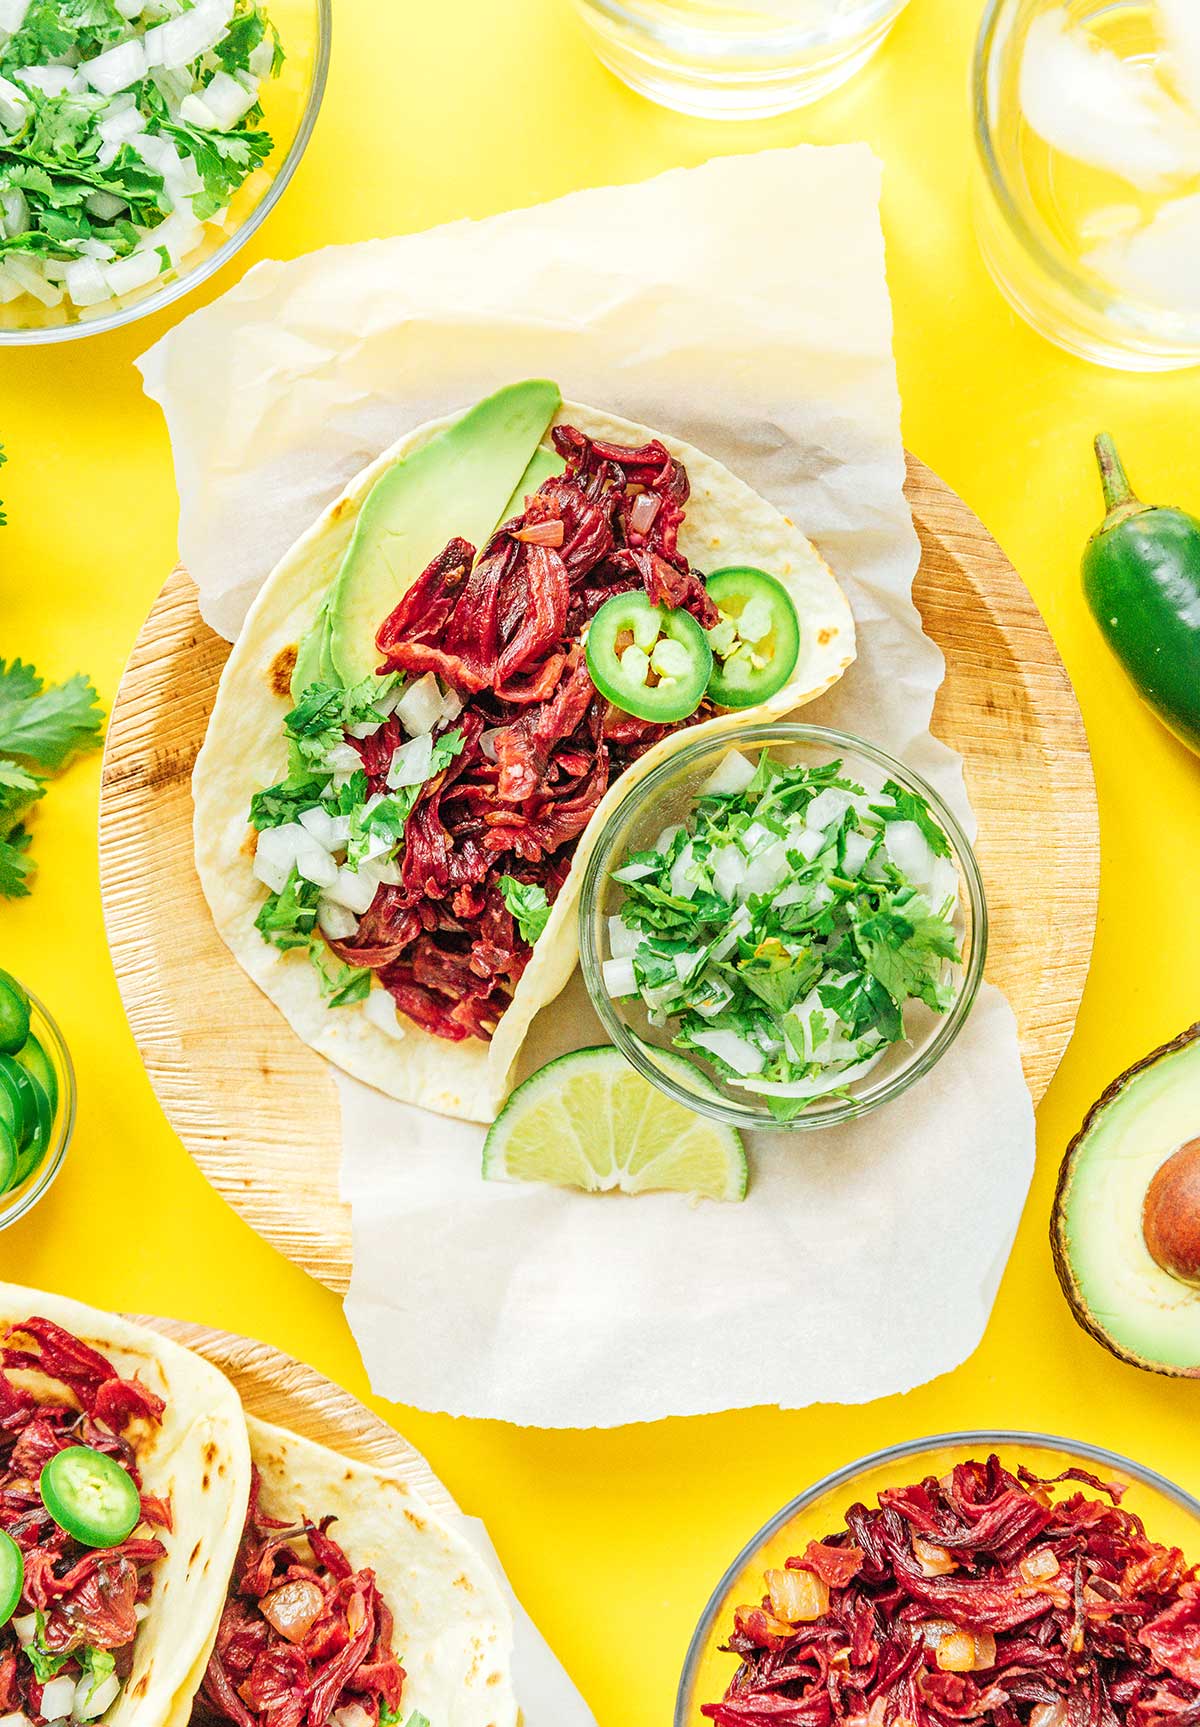 A hibiscus taco on a wooden plate alongside a bowl of onion and cilantro relish and one lime slice